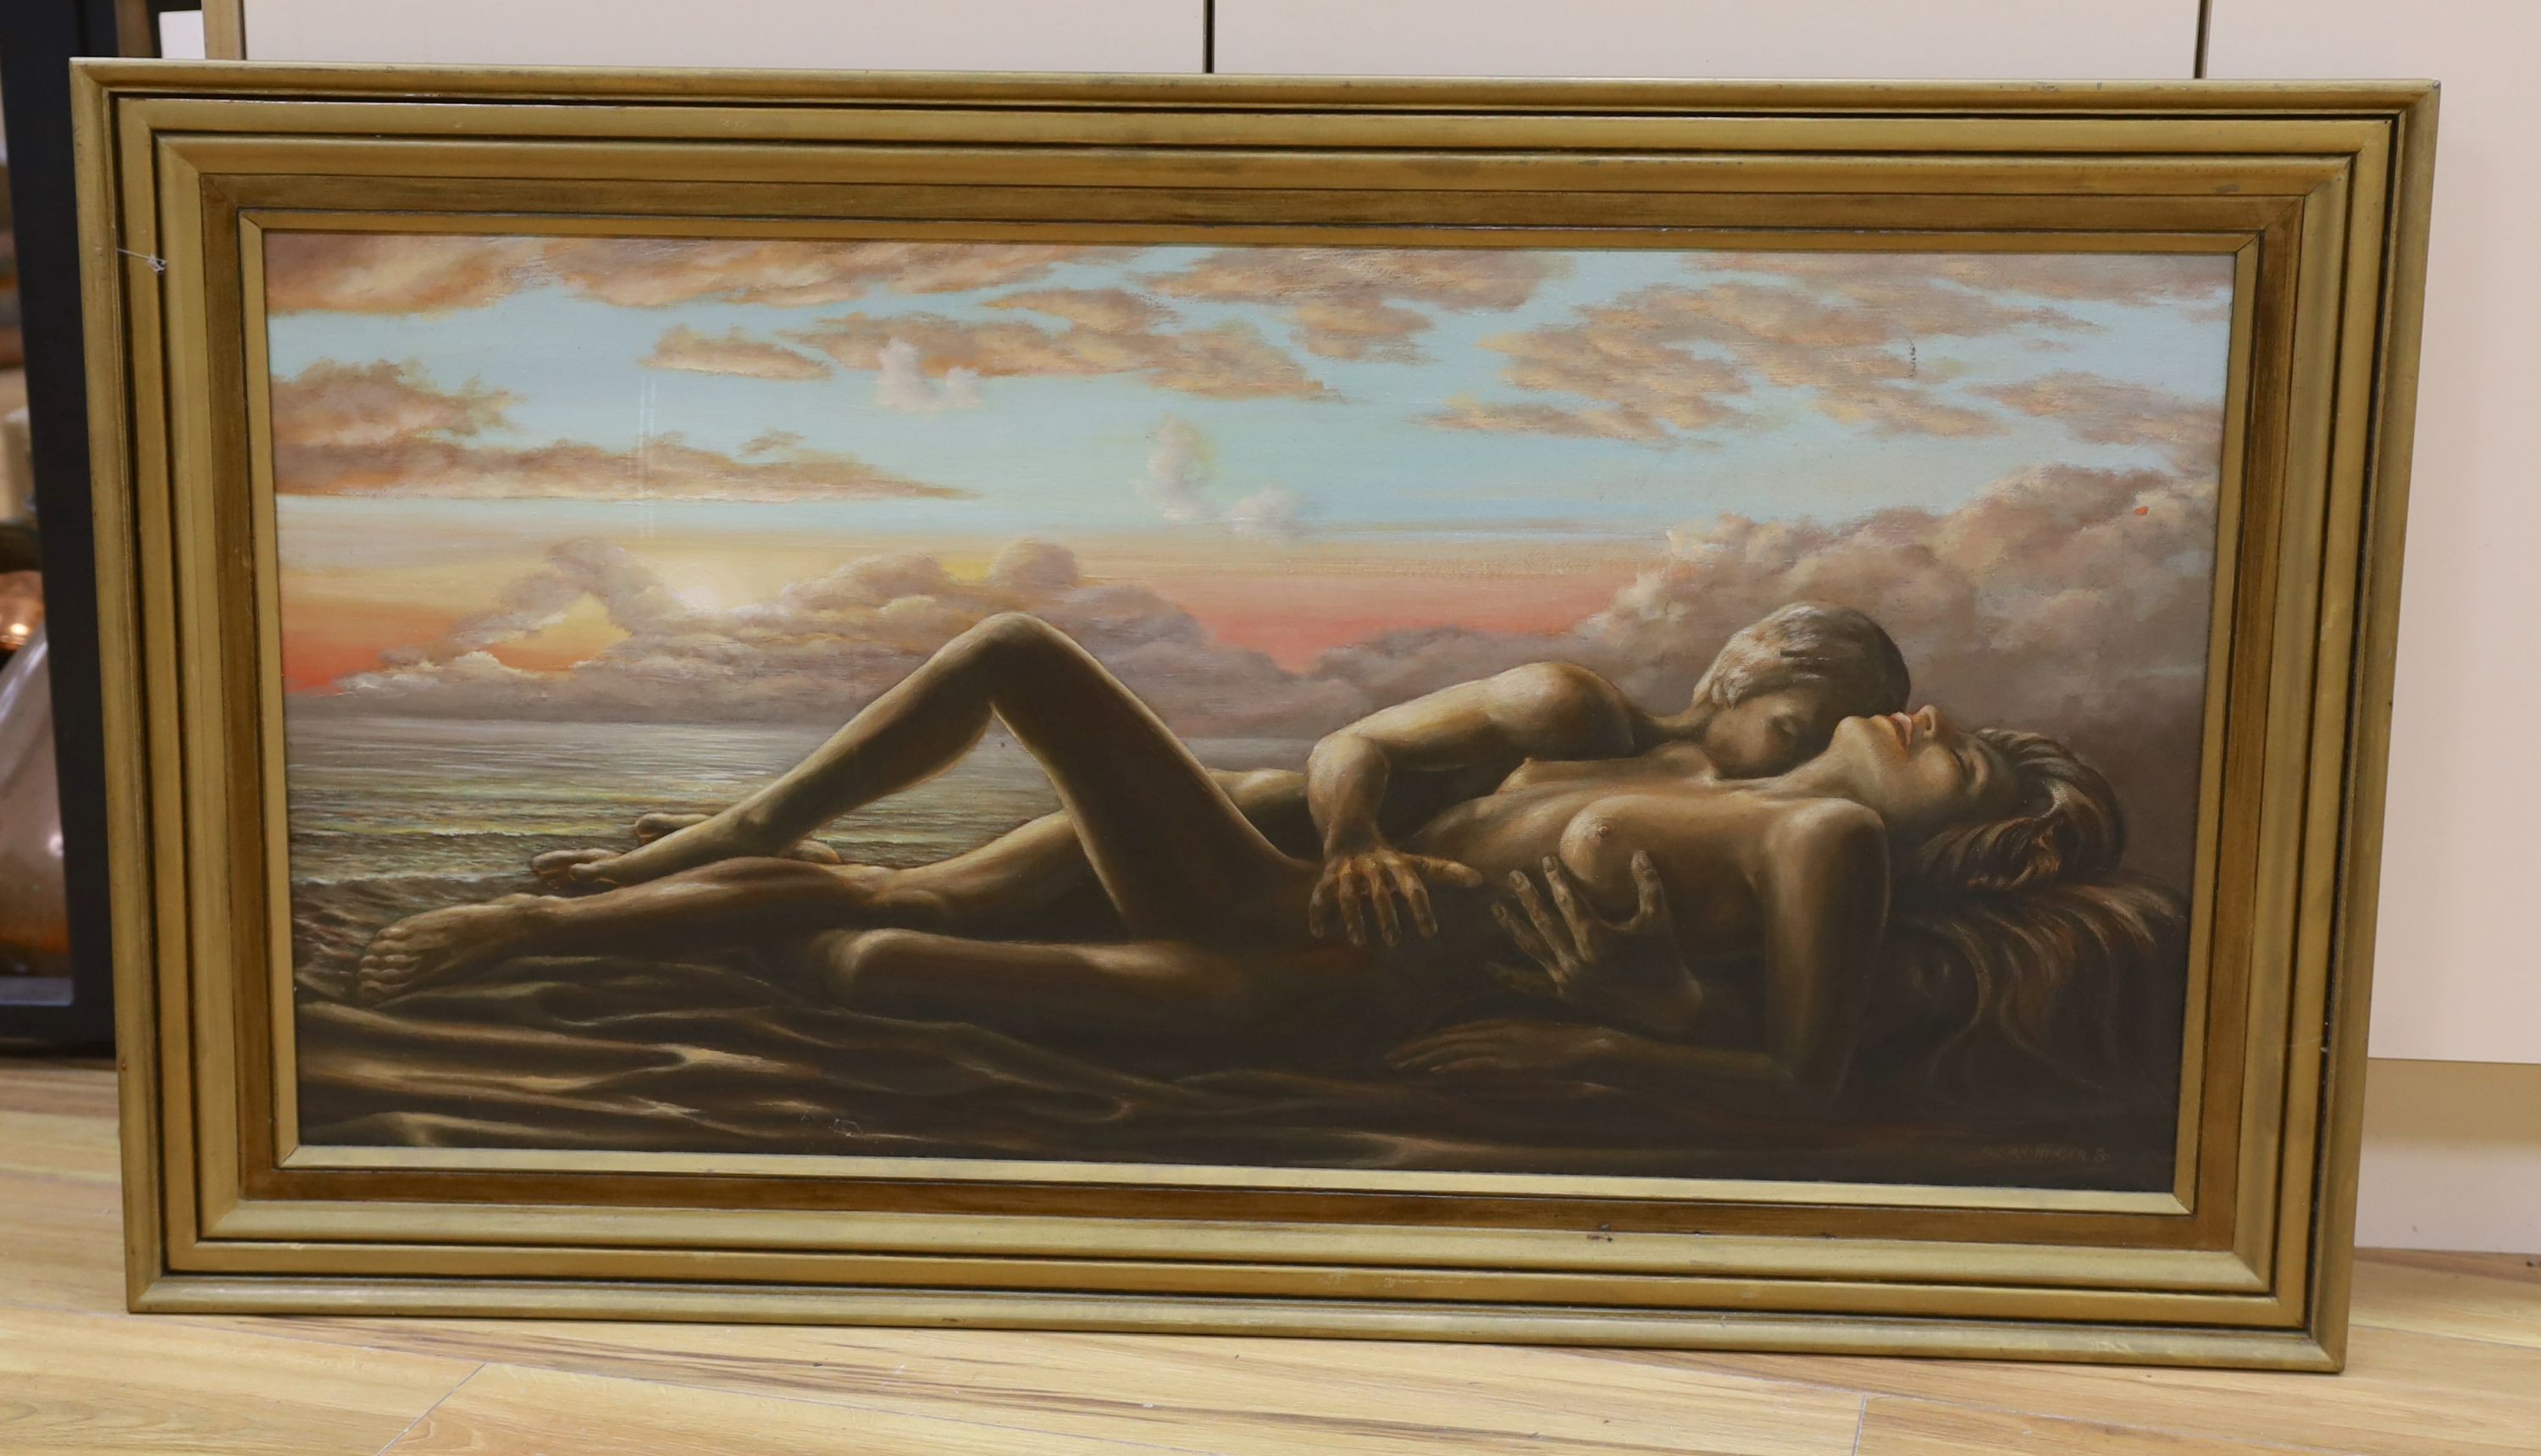 Michael Alcorn-Hender (1945-), oil on board, Embracing nudes on the seashore, signed and dated '80, 49 x 100cm